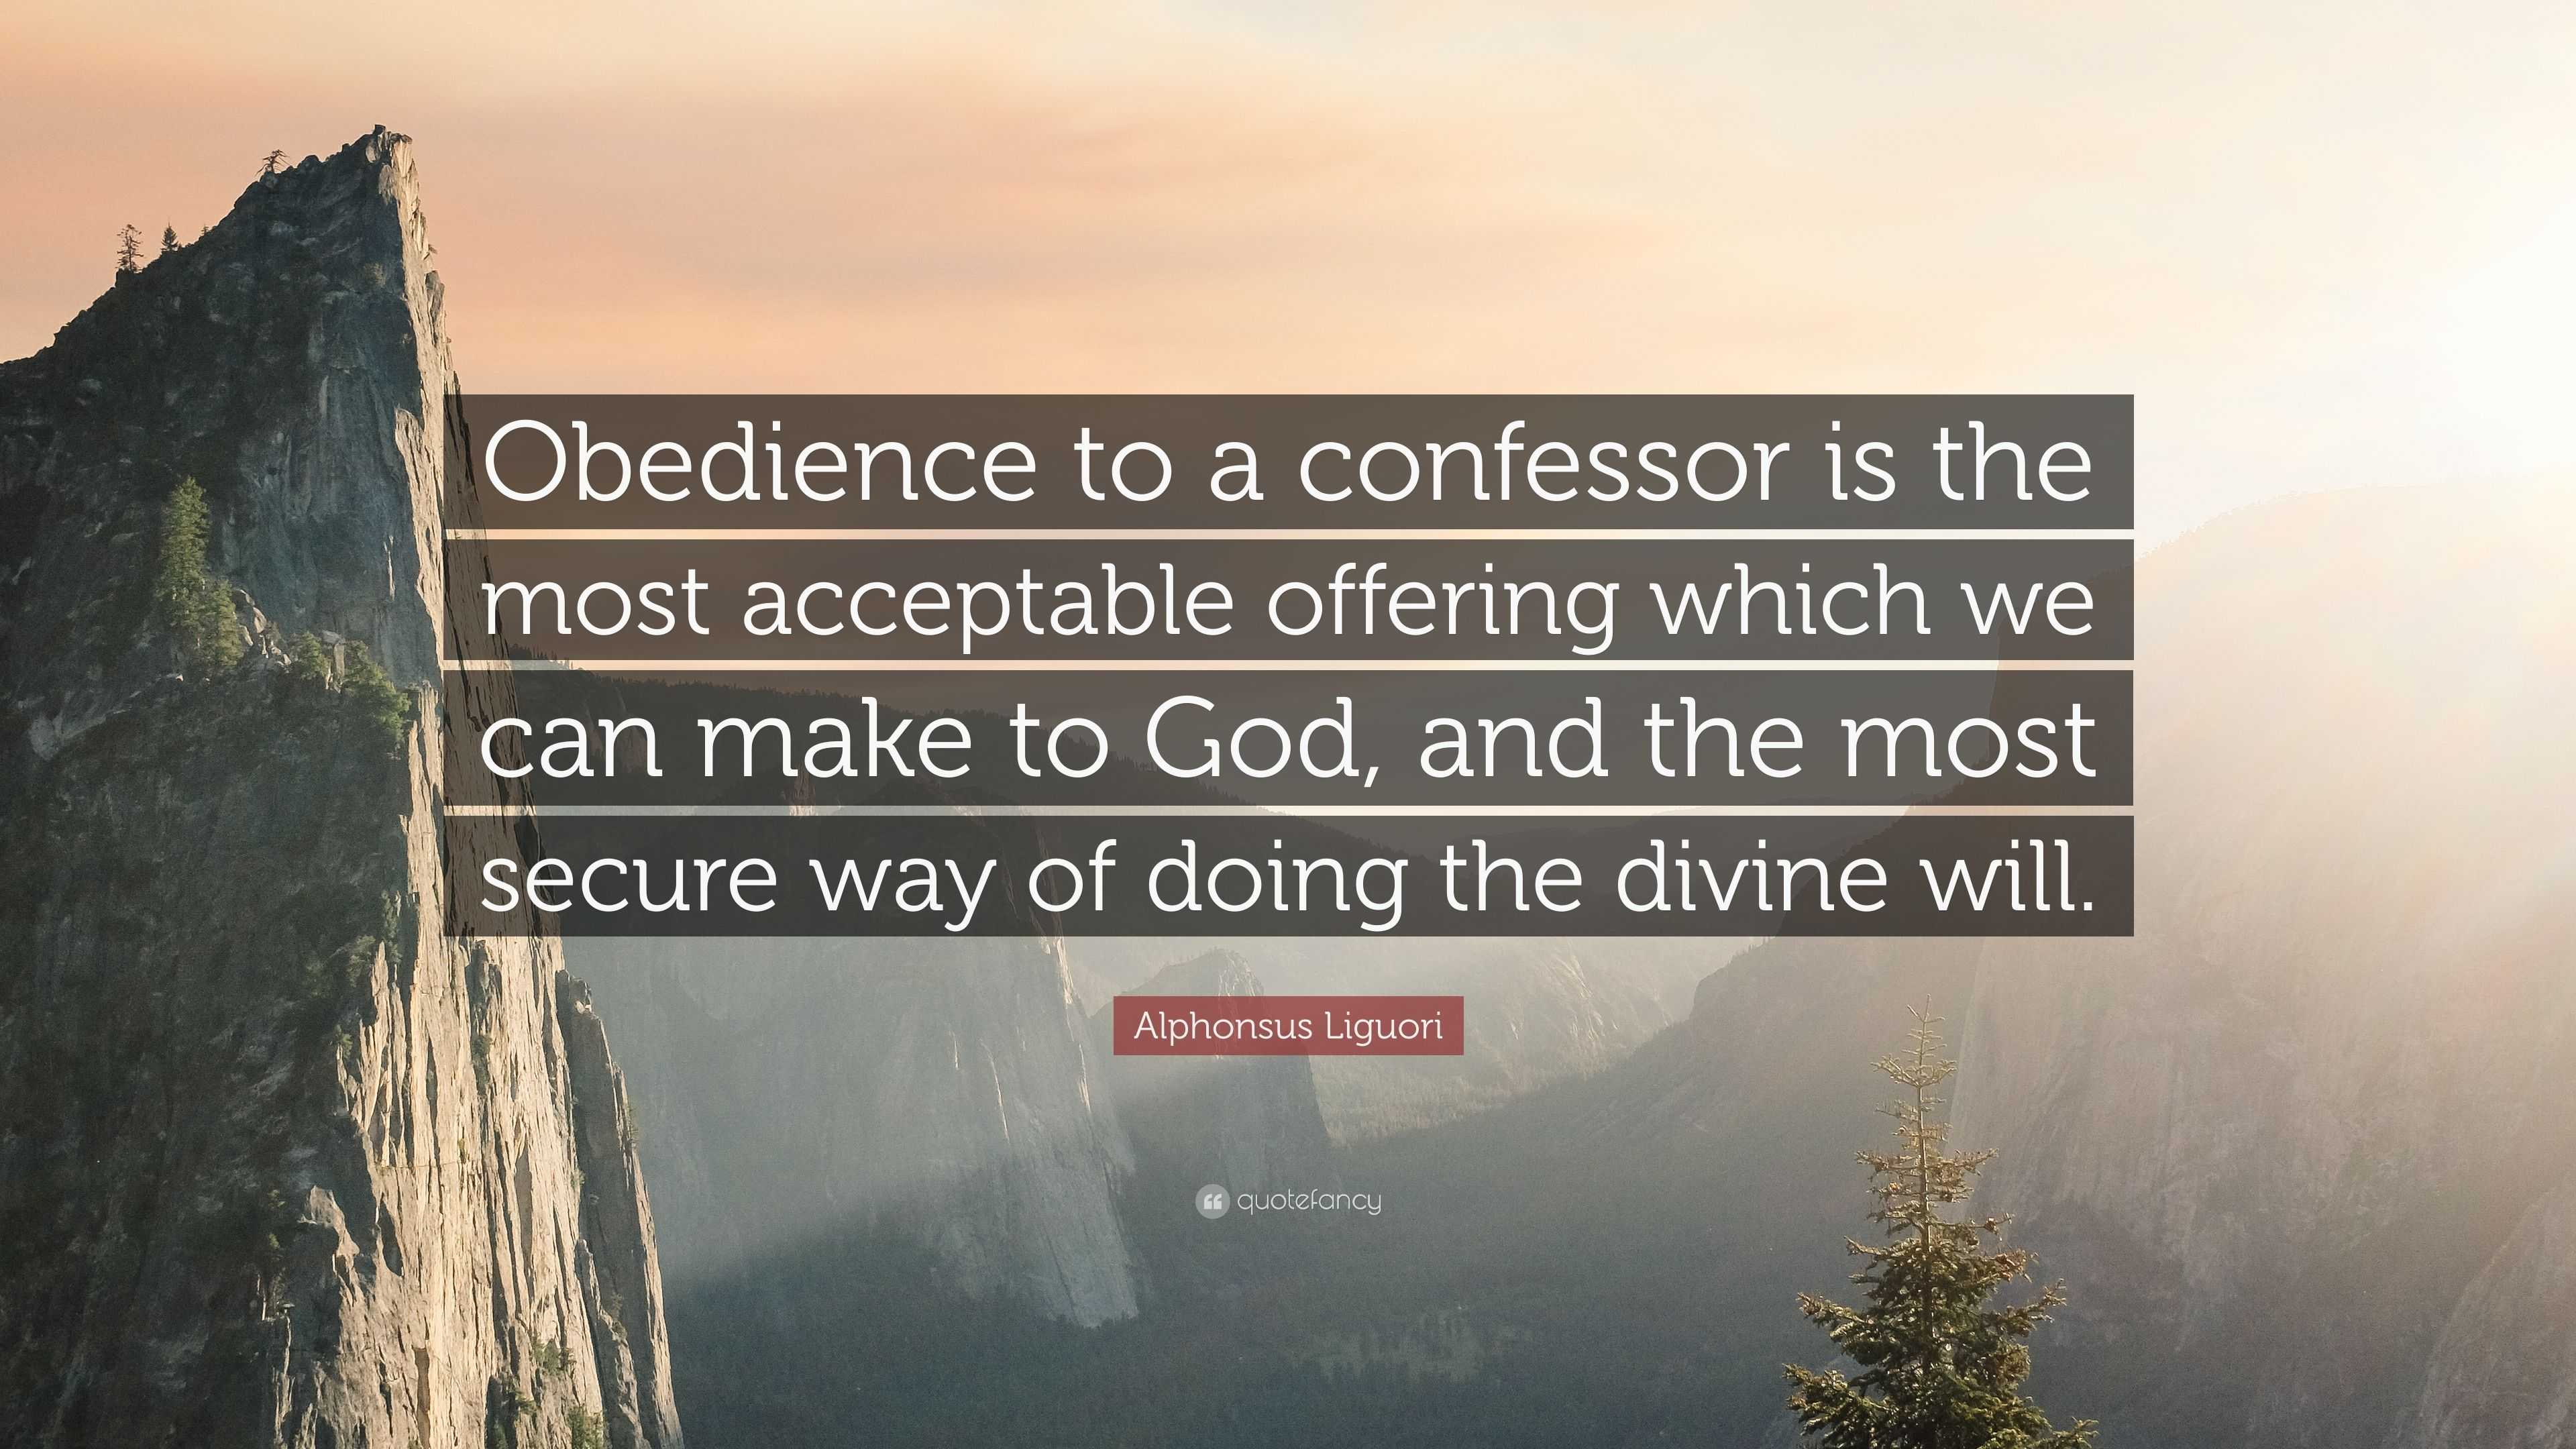 Alphonsus Liguori Quote “obedience To A Confessor Is The Most Acceptable Offering Which We Can